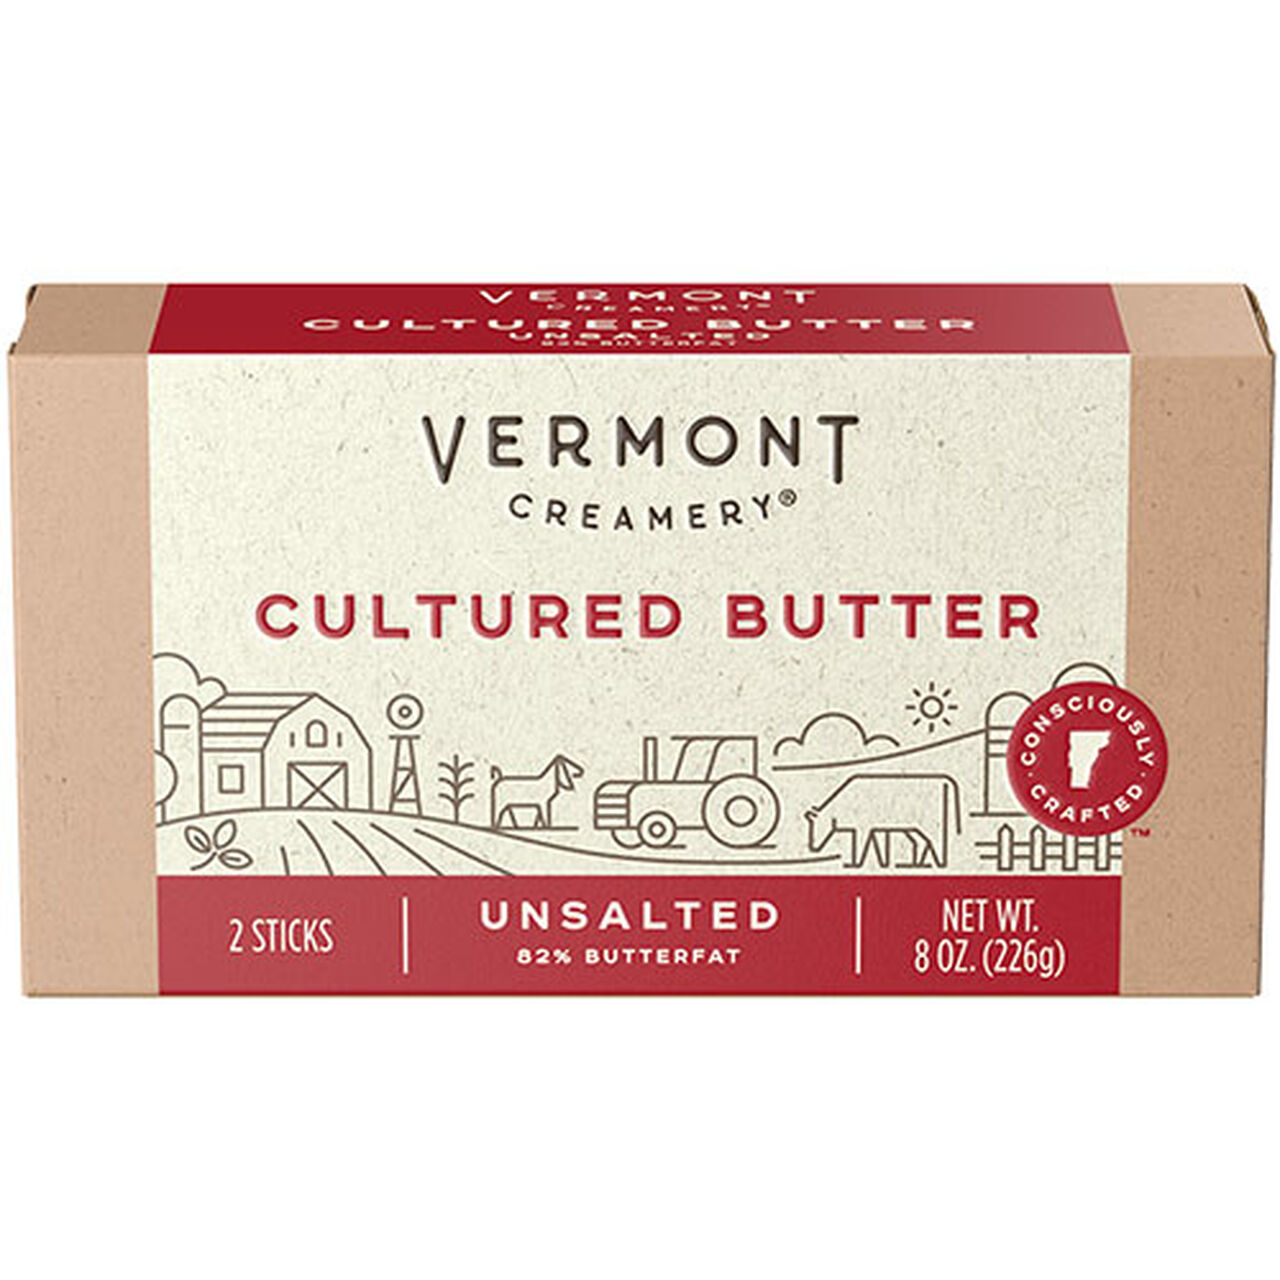 Vermont Creamery Cultured Butter Unsalted 8oz 12ct